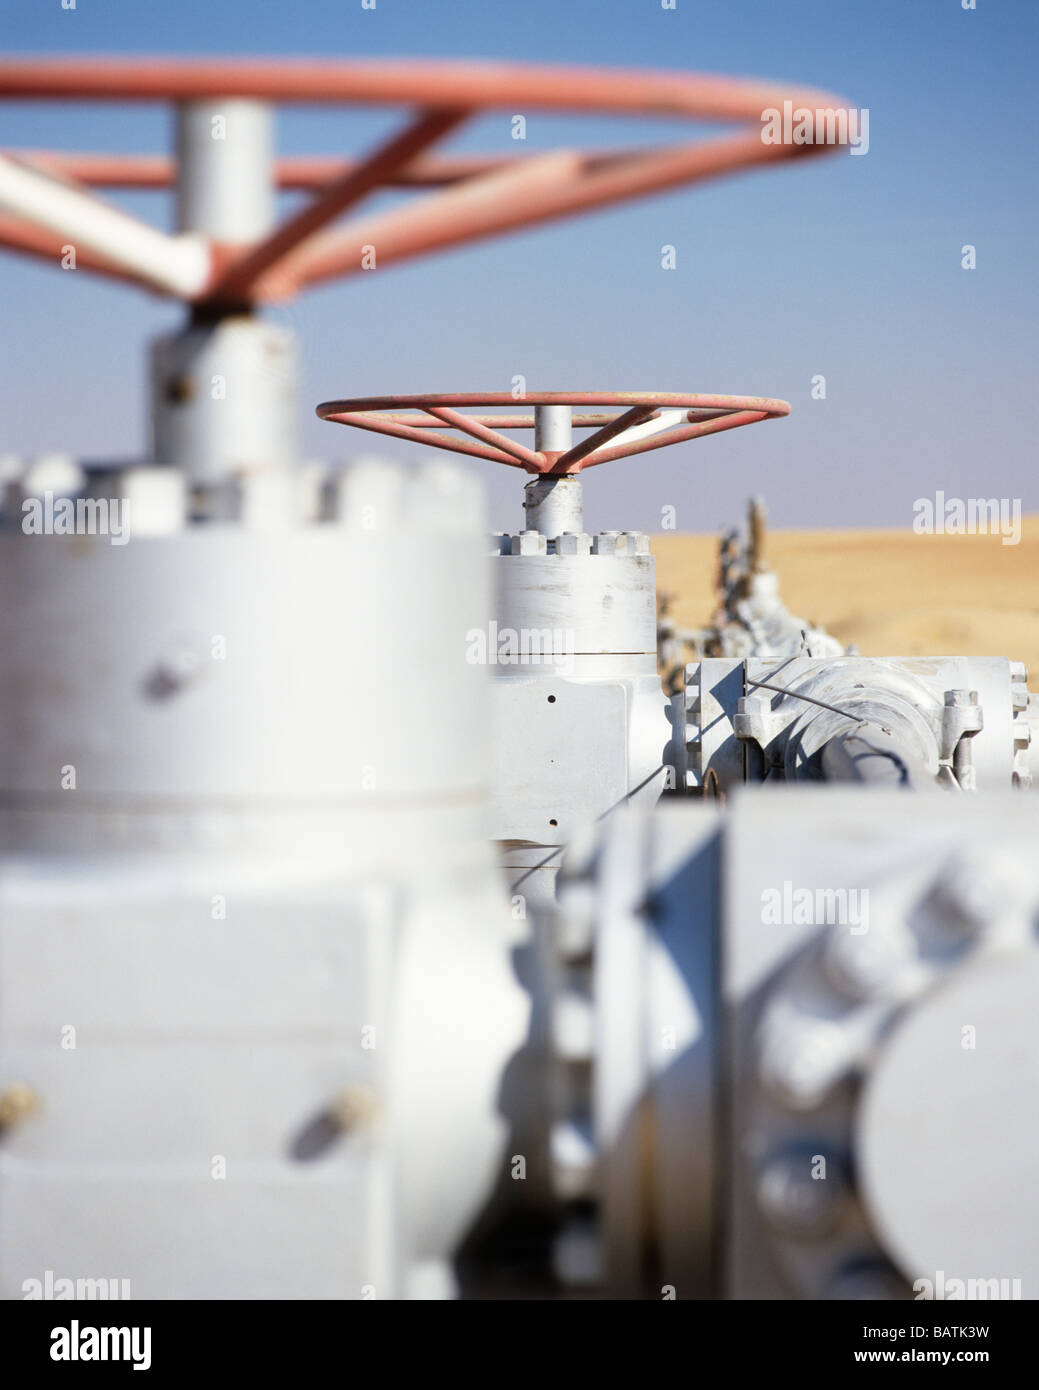 Gas well valve in a gas pipeline. Photographedin the United Arab Emirates. Stock Photo